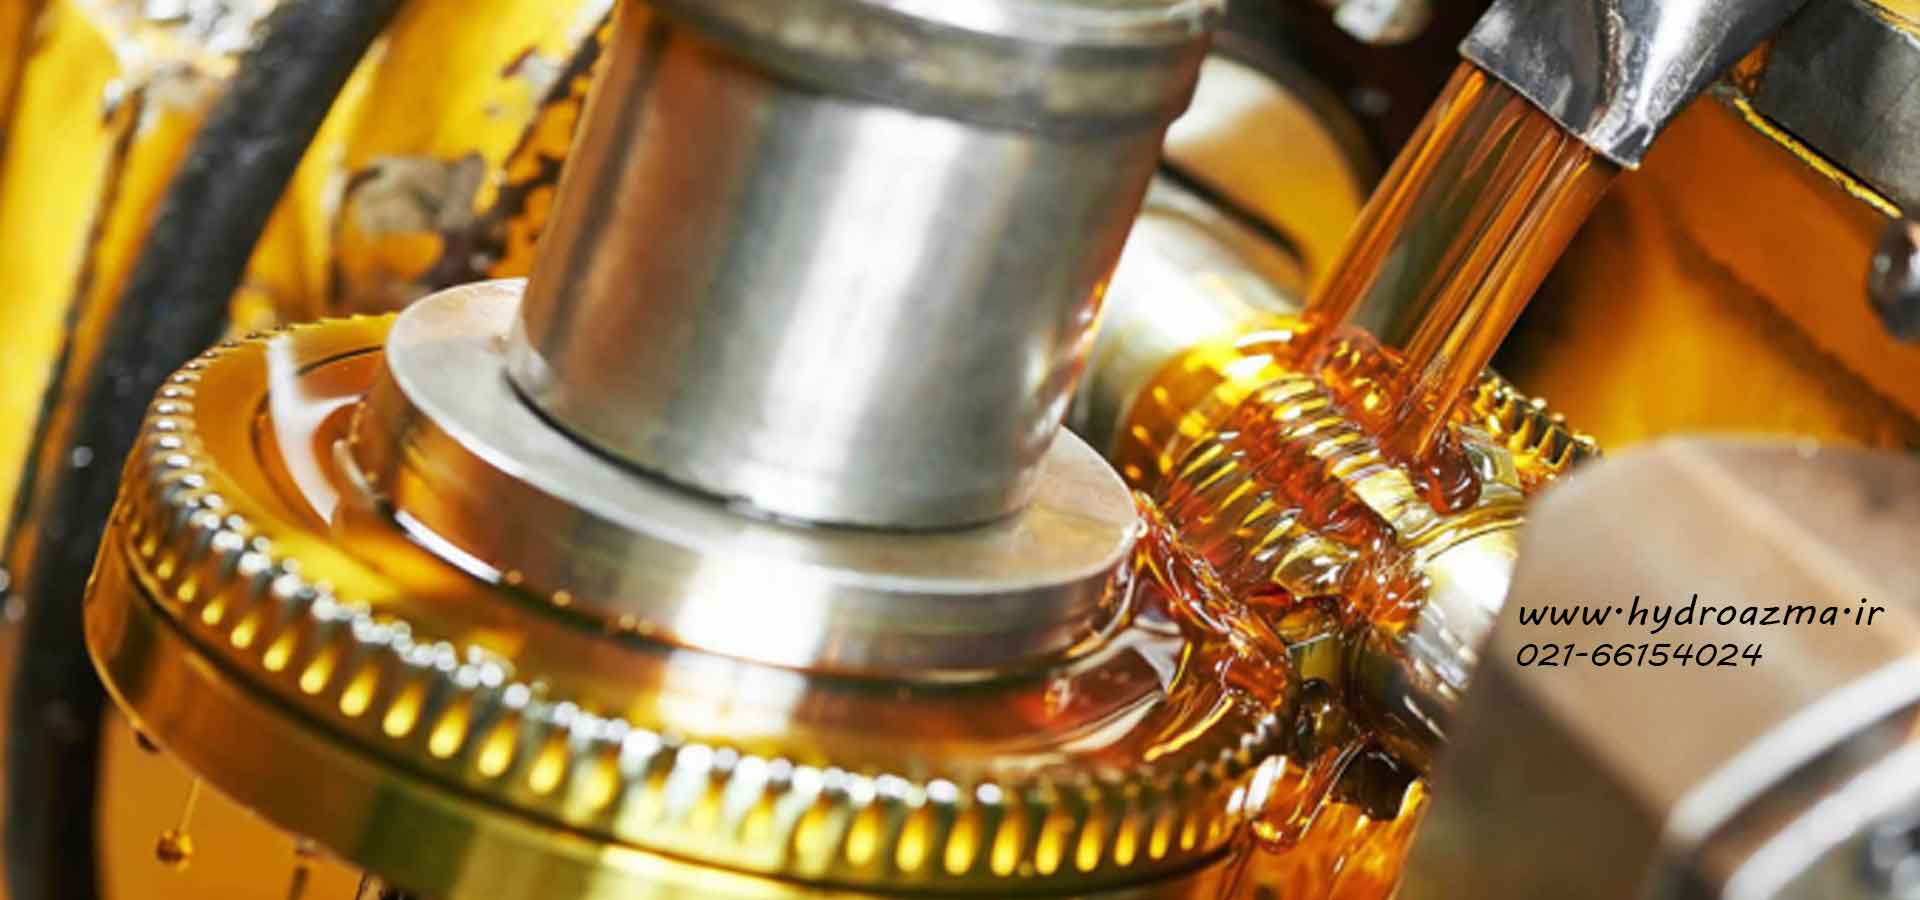 Familiarity with lubricants and industrial oils